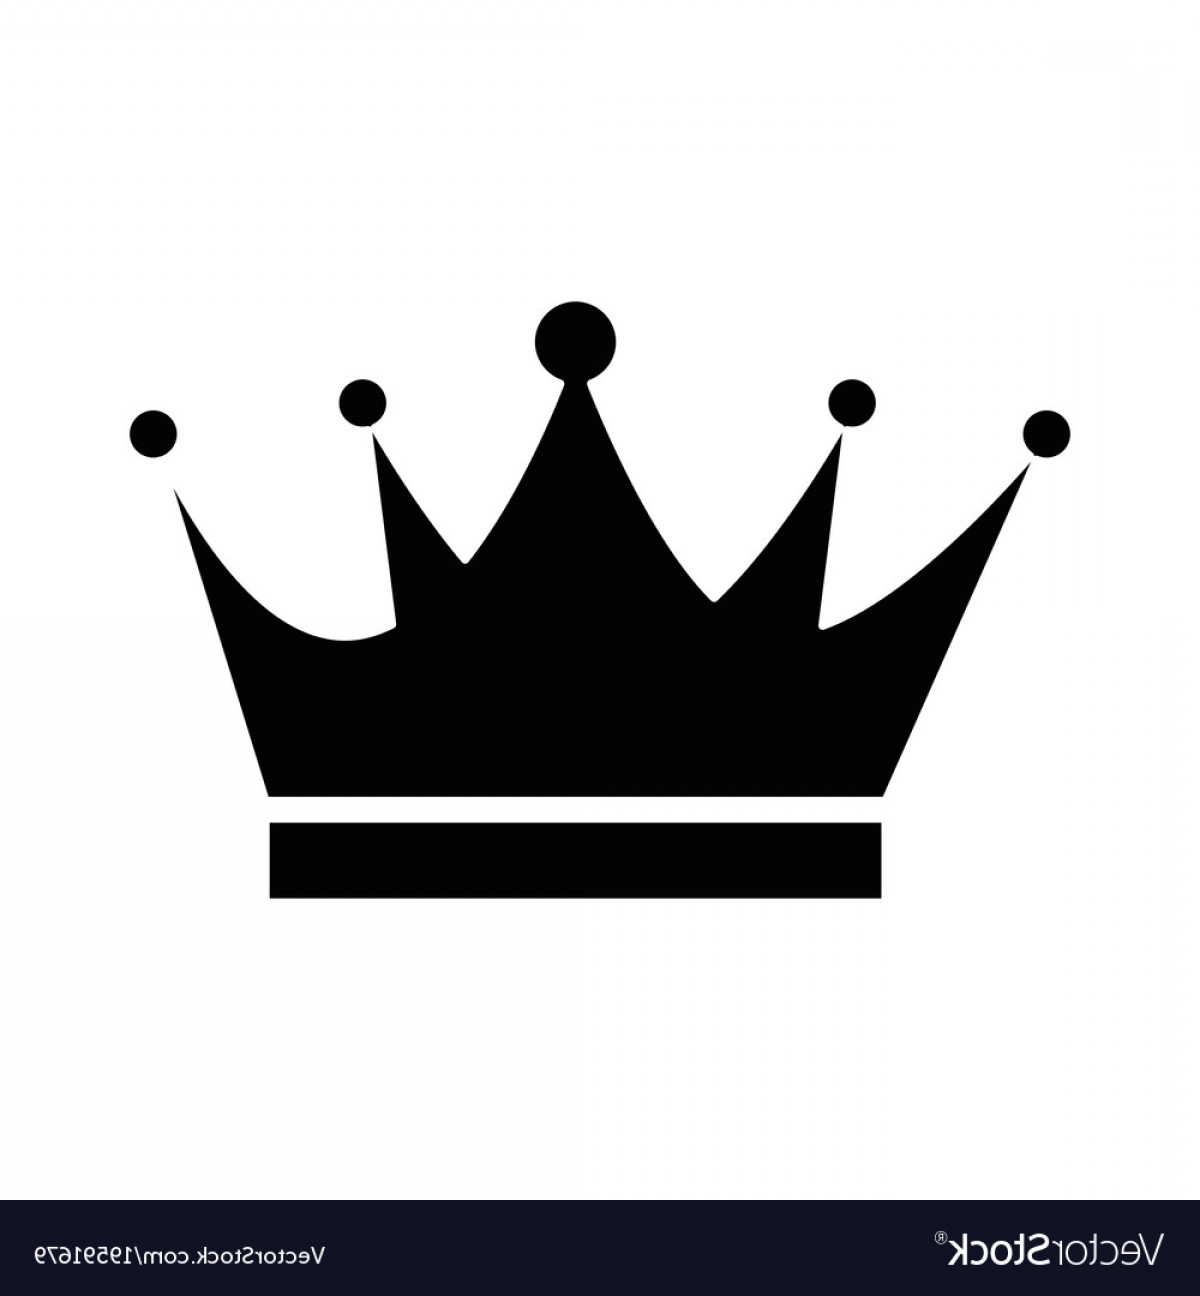 Download King Crown Vector at Vectorified.com | Collection of King ...